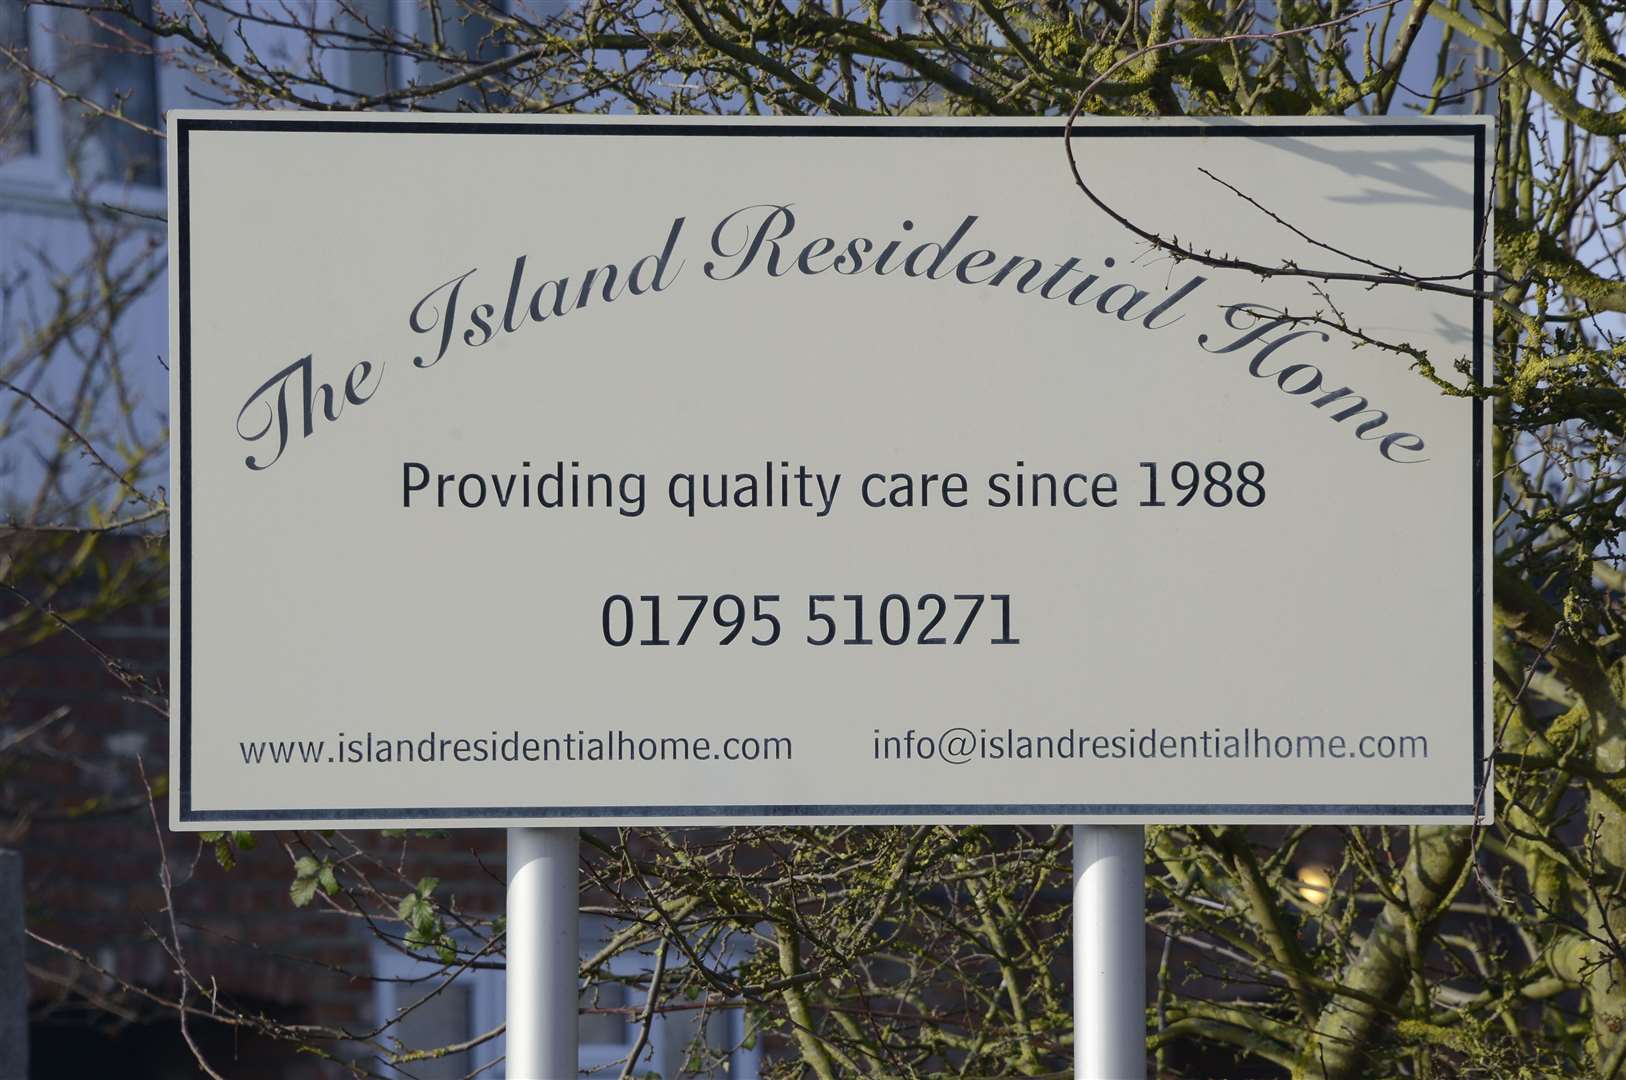 The Island Residential Home